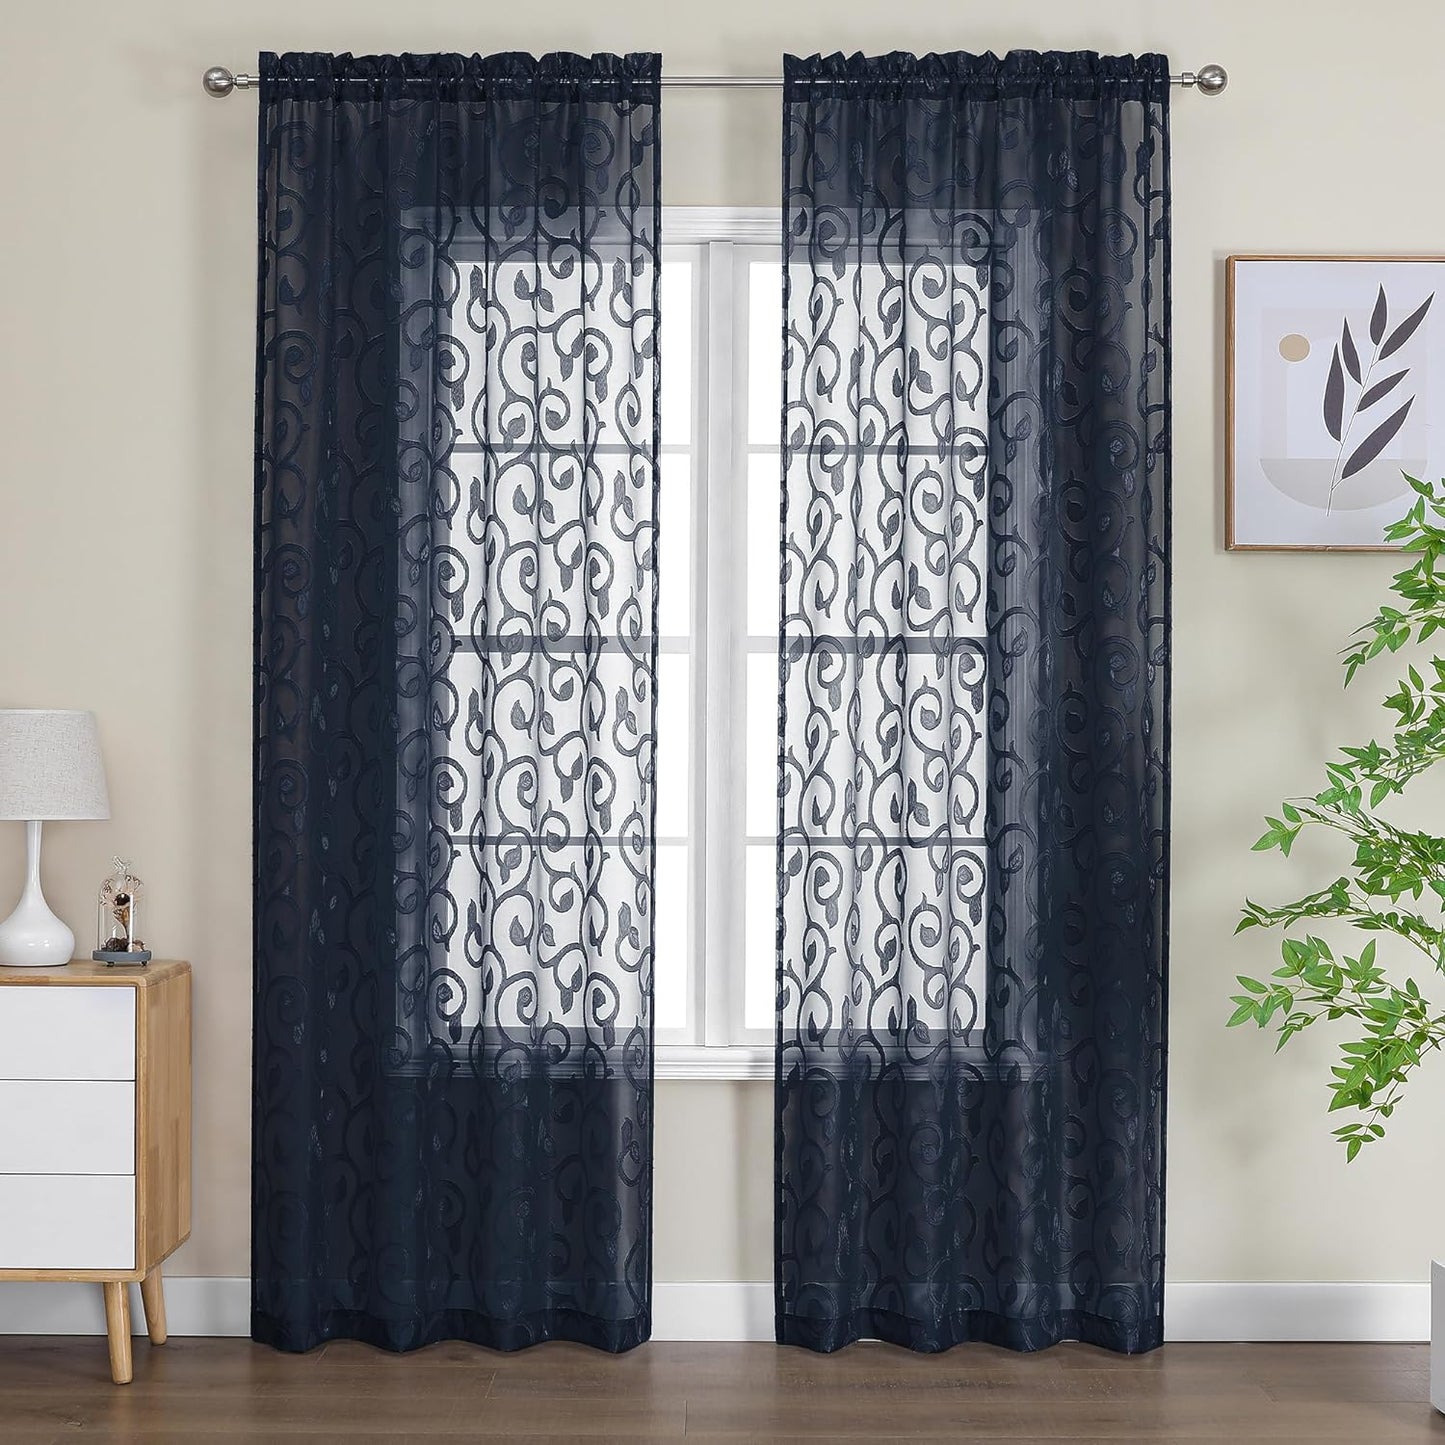 OWENIE Furman Sheer Curtains 84 Inches Long for Bedroom Living Room 2 Panels Set, Light Filtering Window Curtains, Semi Transparent Voile Top Dual Rod Pocket, Grey, 40Wx84L Inch, Total 84 Inches Width  OWENIE Navy Blue 40W X 96L 